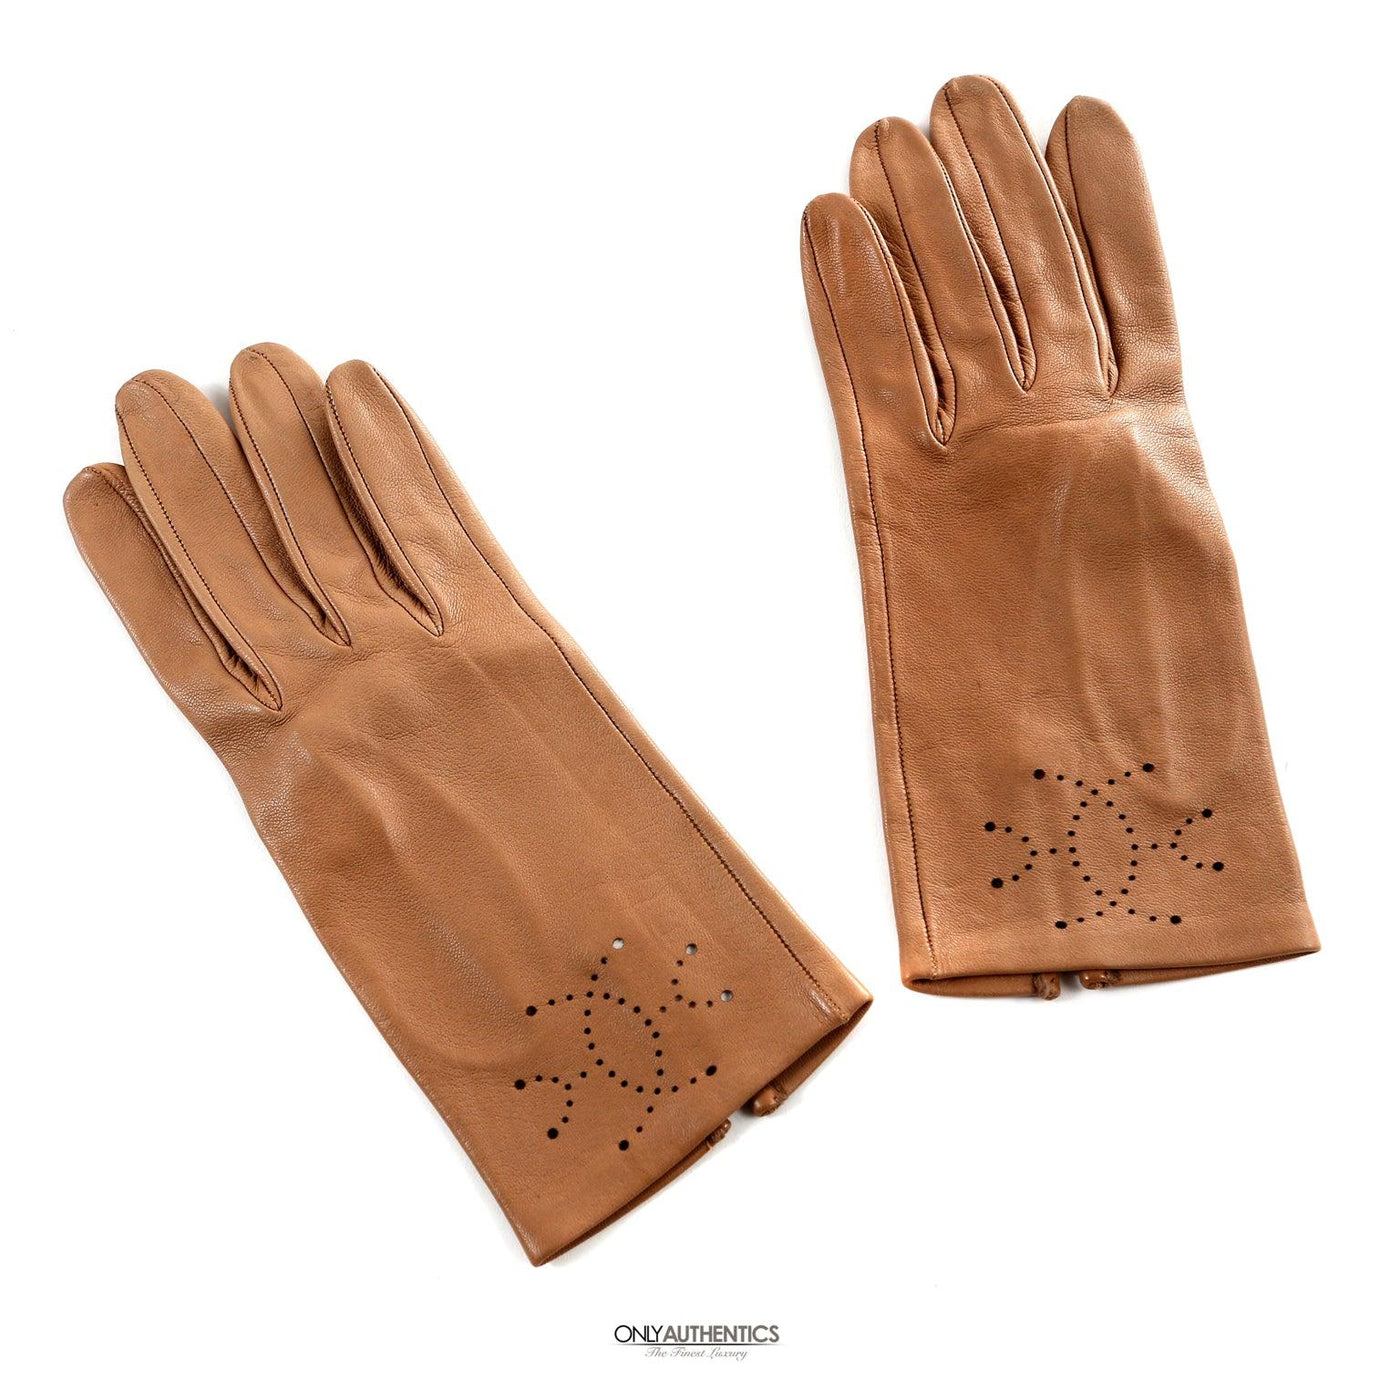 Hermès Gold Leather Eclipse Gloves size 6.5 - Only Authentics